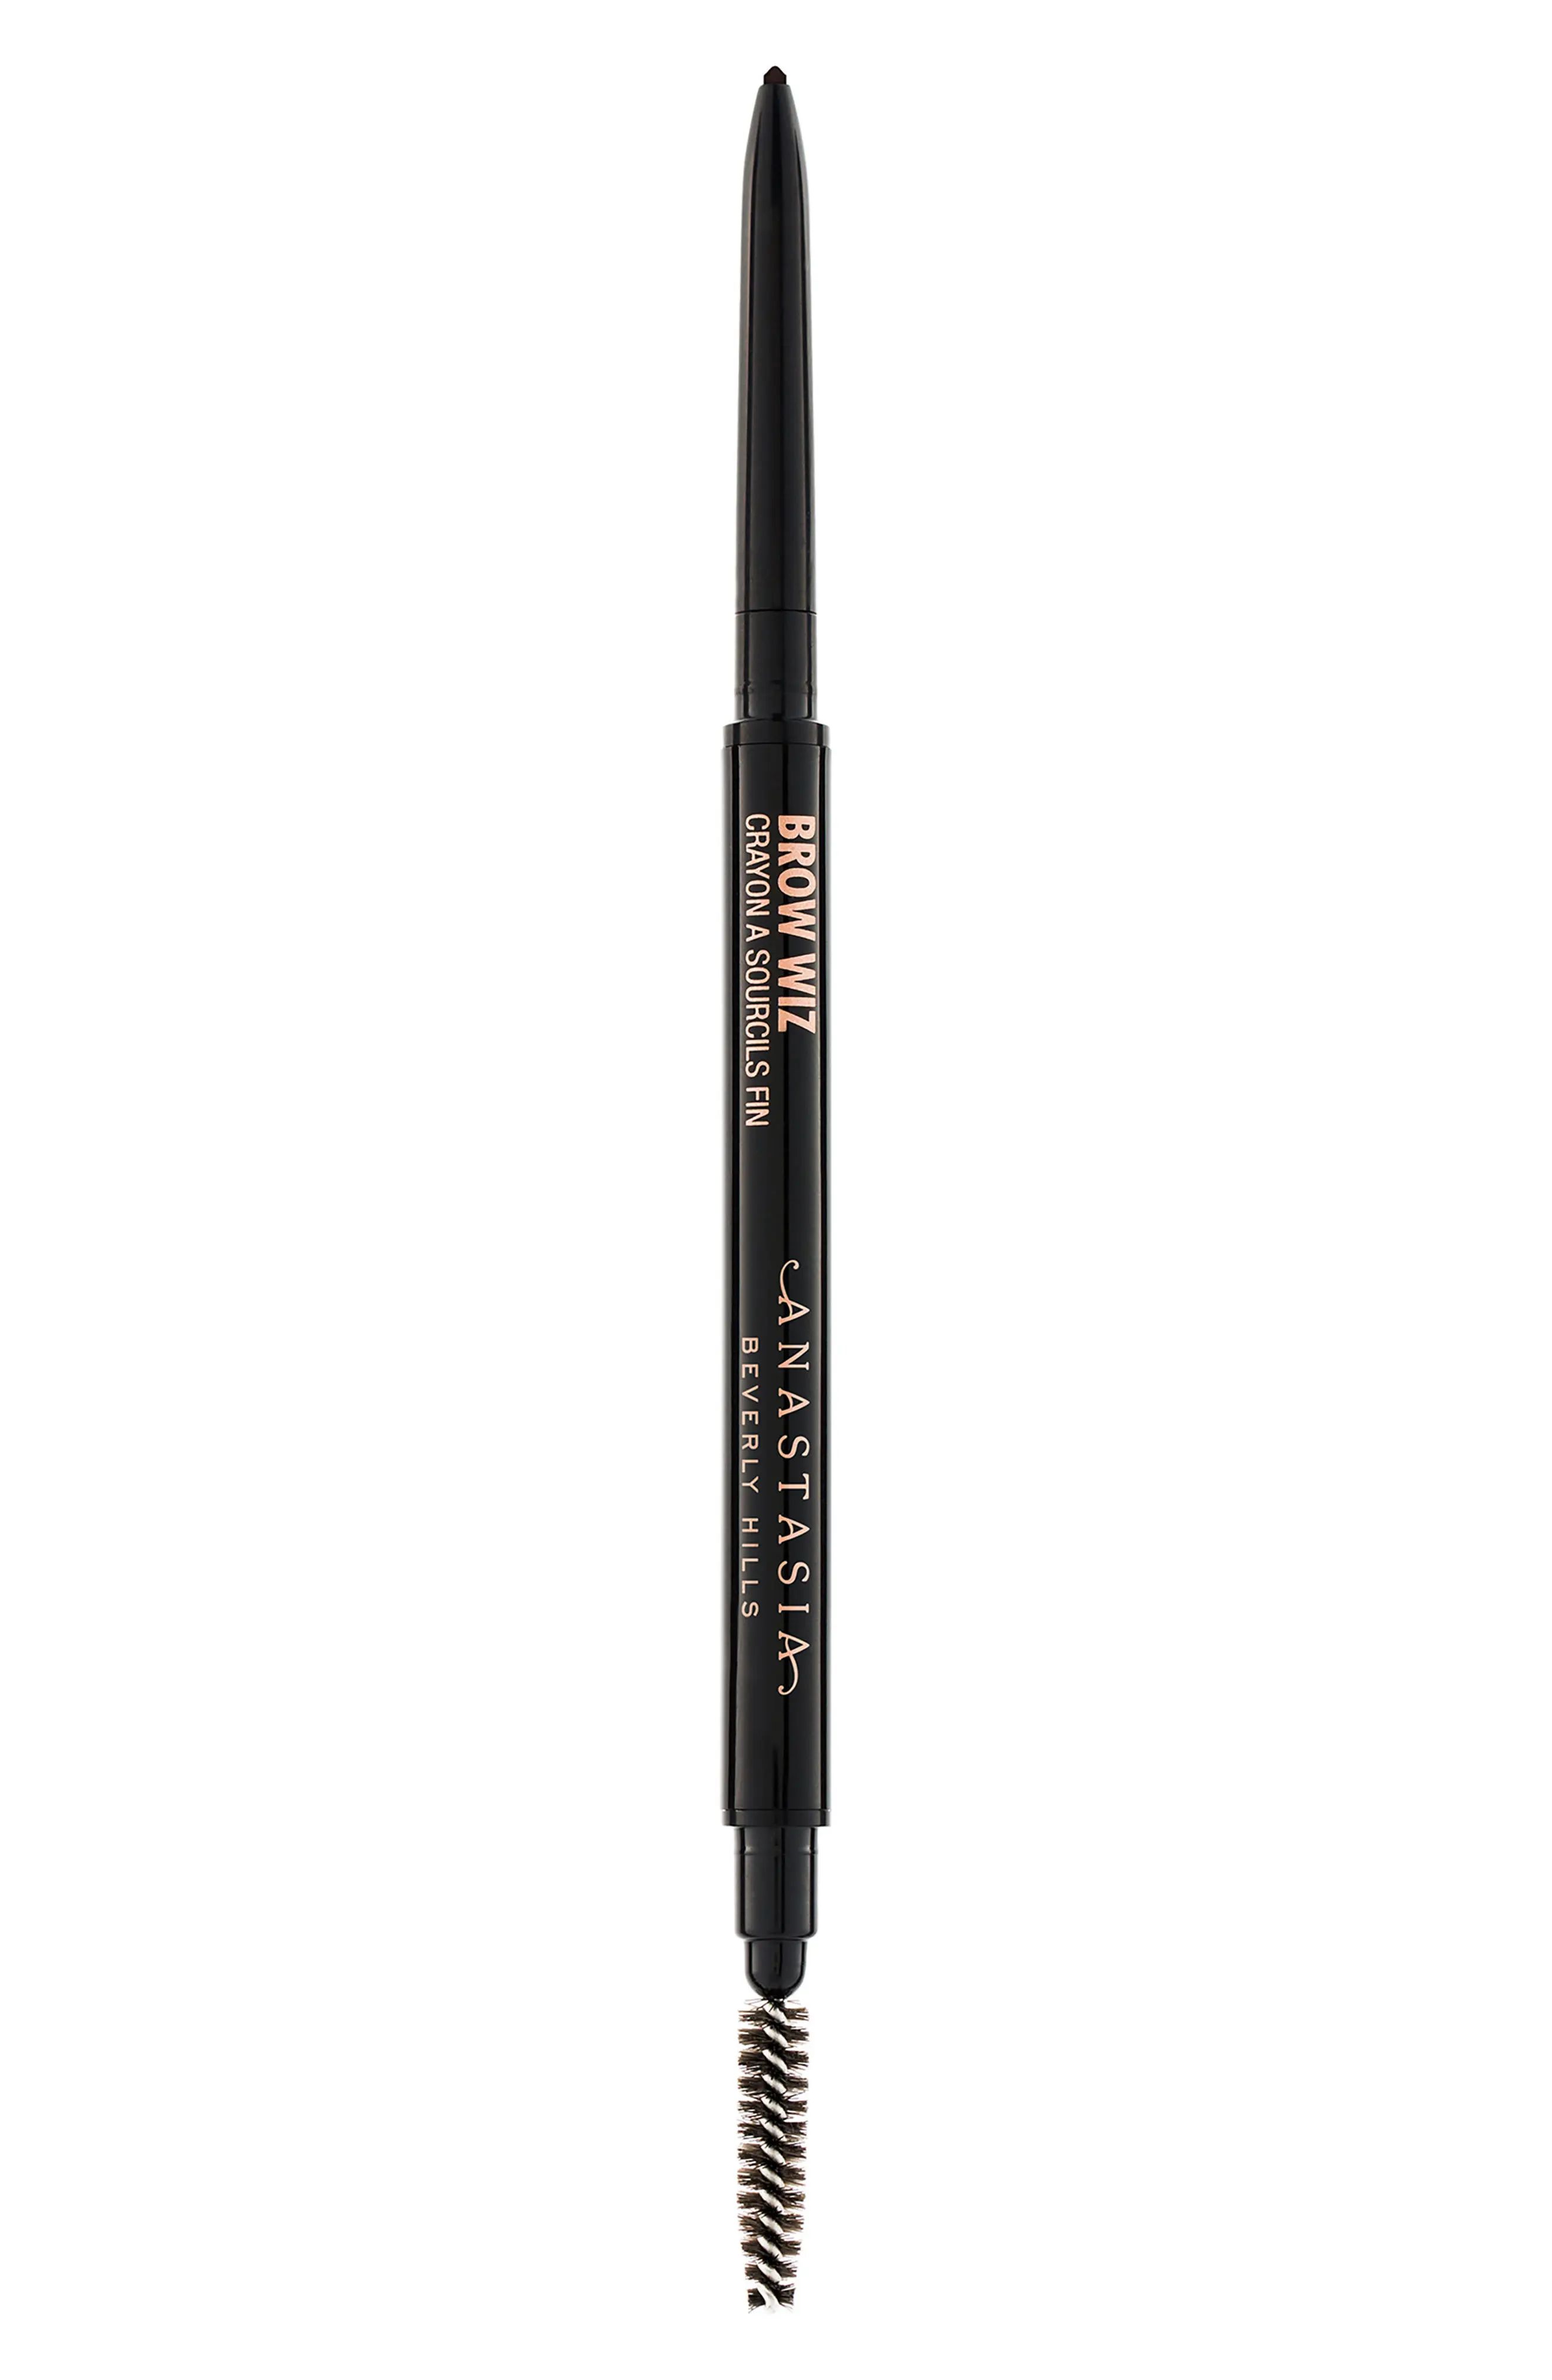 ANASTASIA BEVERLY HILLS Brow Wiz Mechanical Brow Pencil in Ebony at Nordstrom | Nordstrom